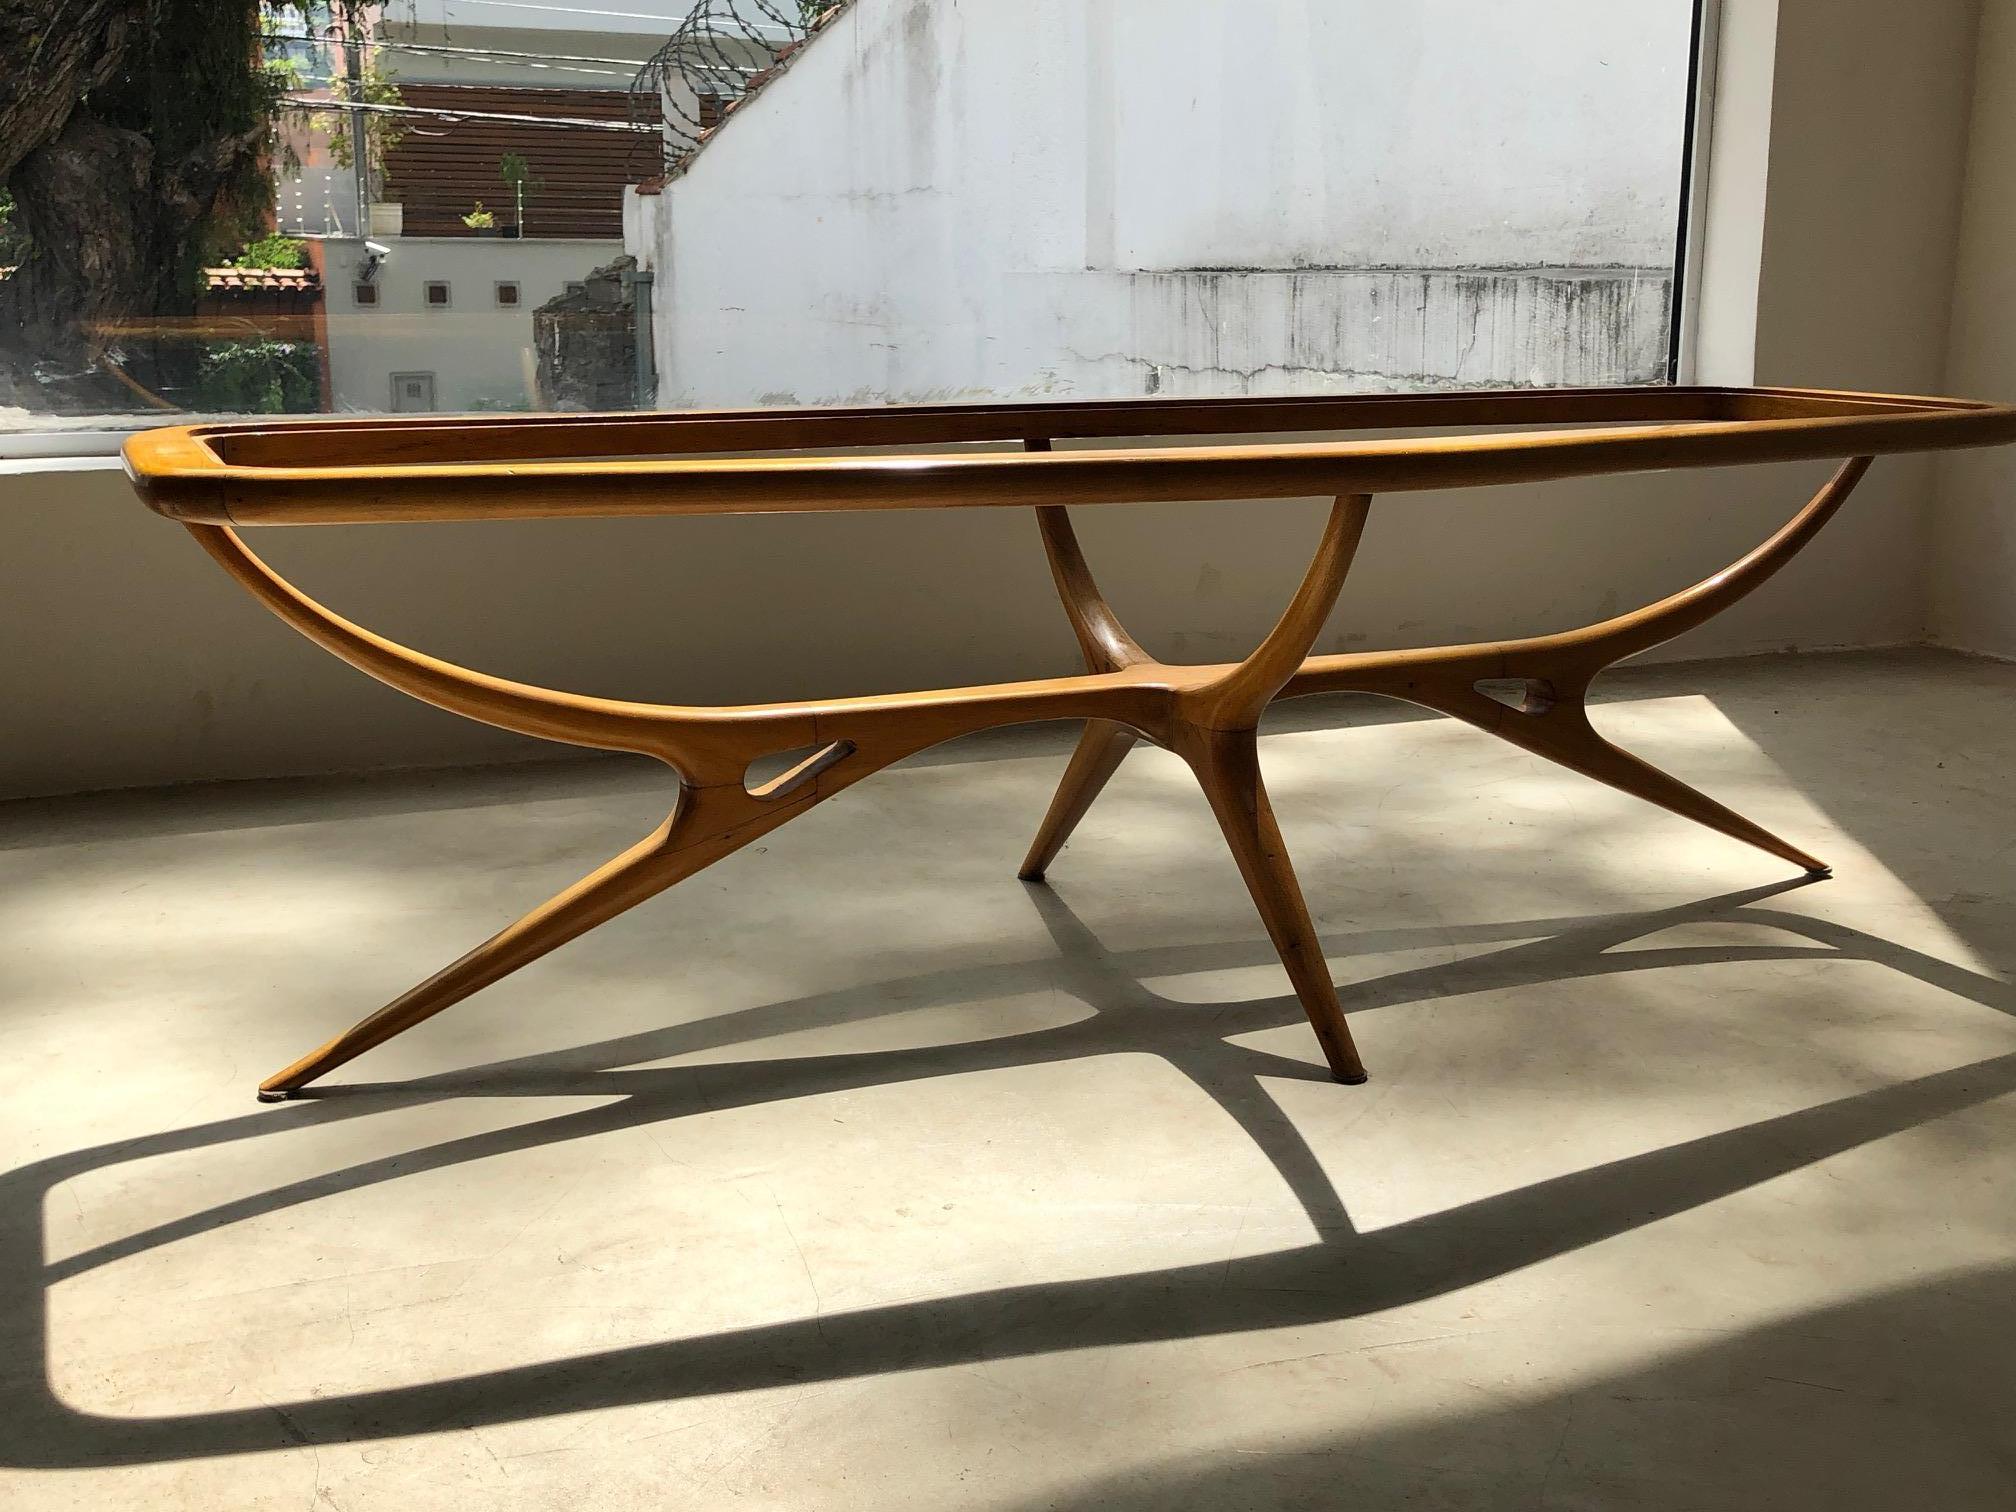 Giuseppe Scapinelli. Amazing biormorphic shaped Brazilian modern design furniture item. This coffee is table made of solid pau marfim wood with glass top. A 1950s design that reaches the level of an work of art.